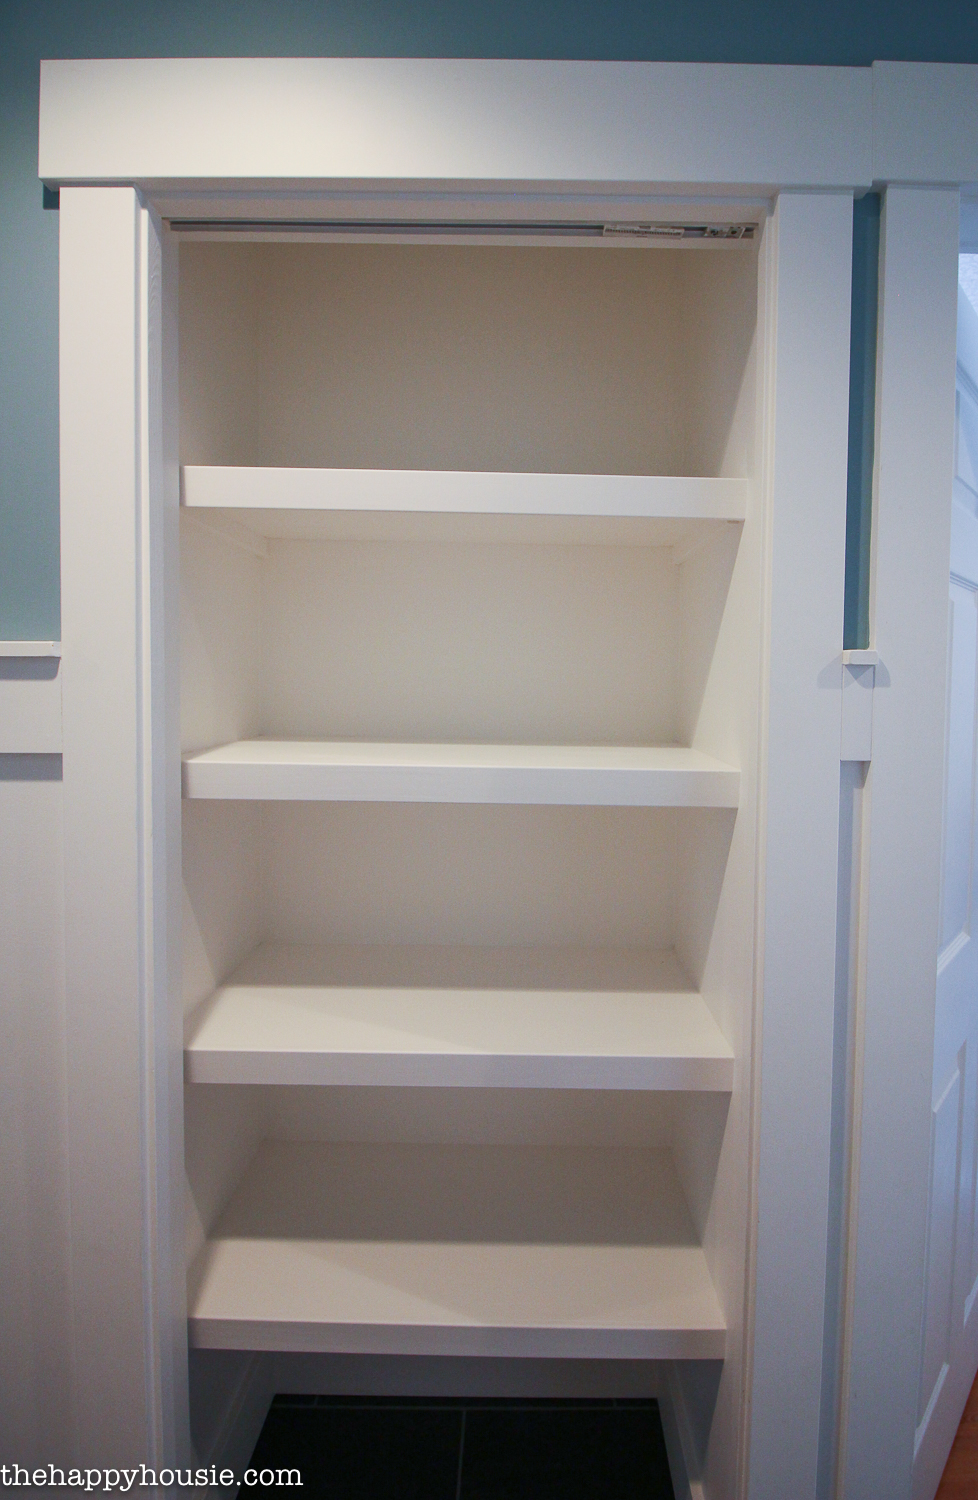 How To Replace Wire Shelves With Diy, How To Install Wood Closet Shelves